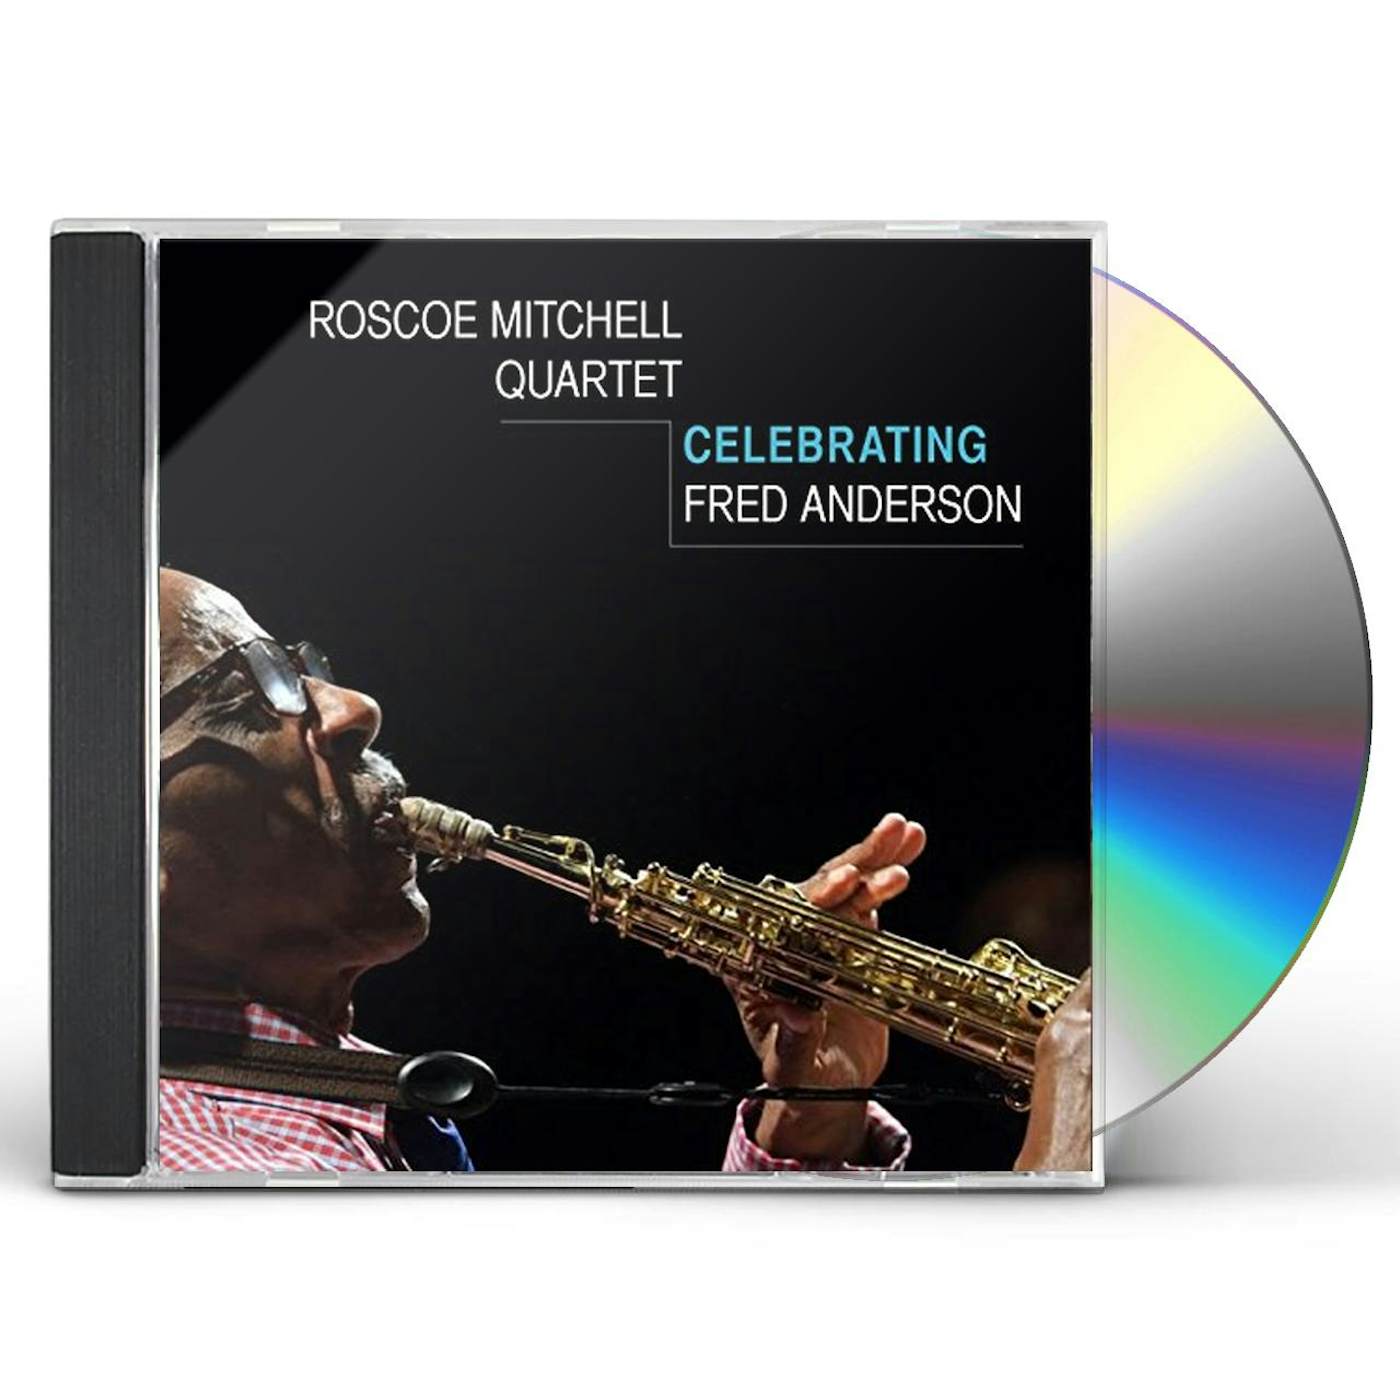 Roscoe Mitchell CELEBRATING FRED ANDERSON CD